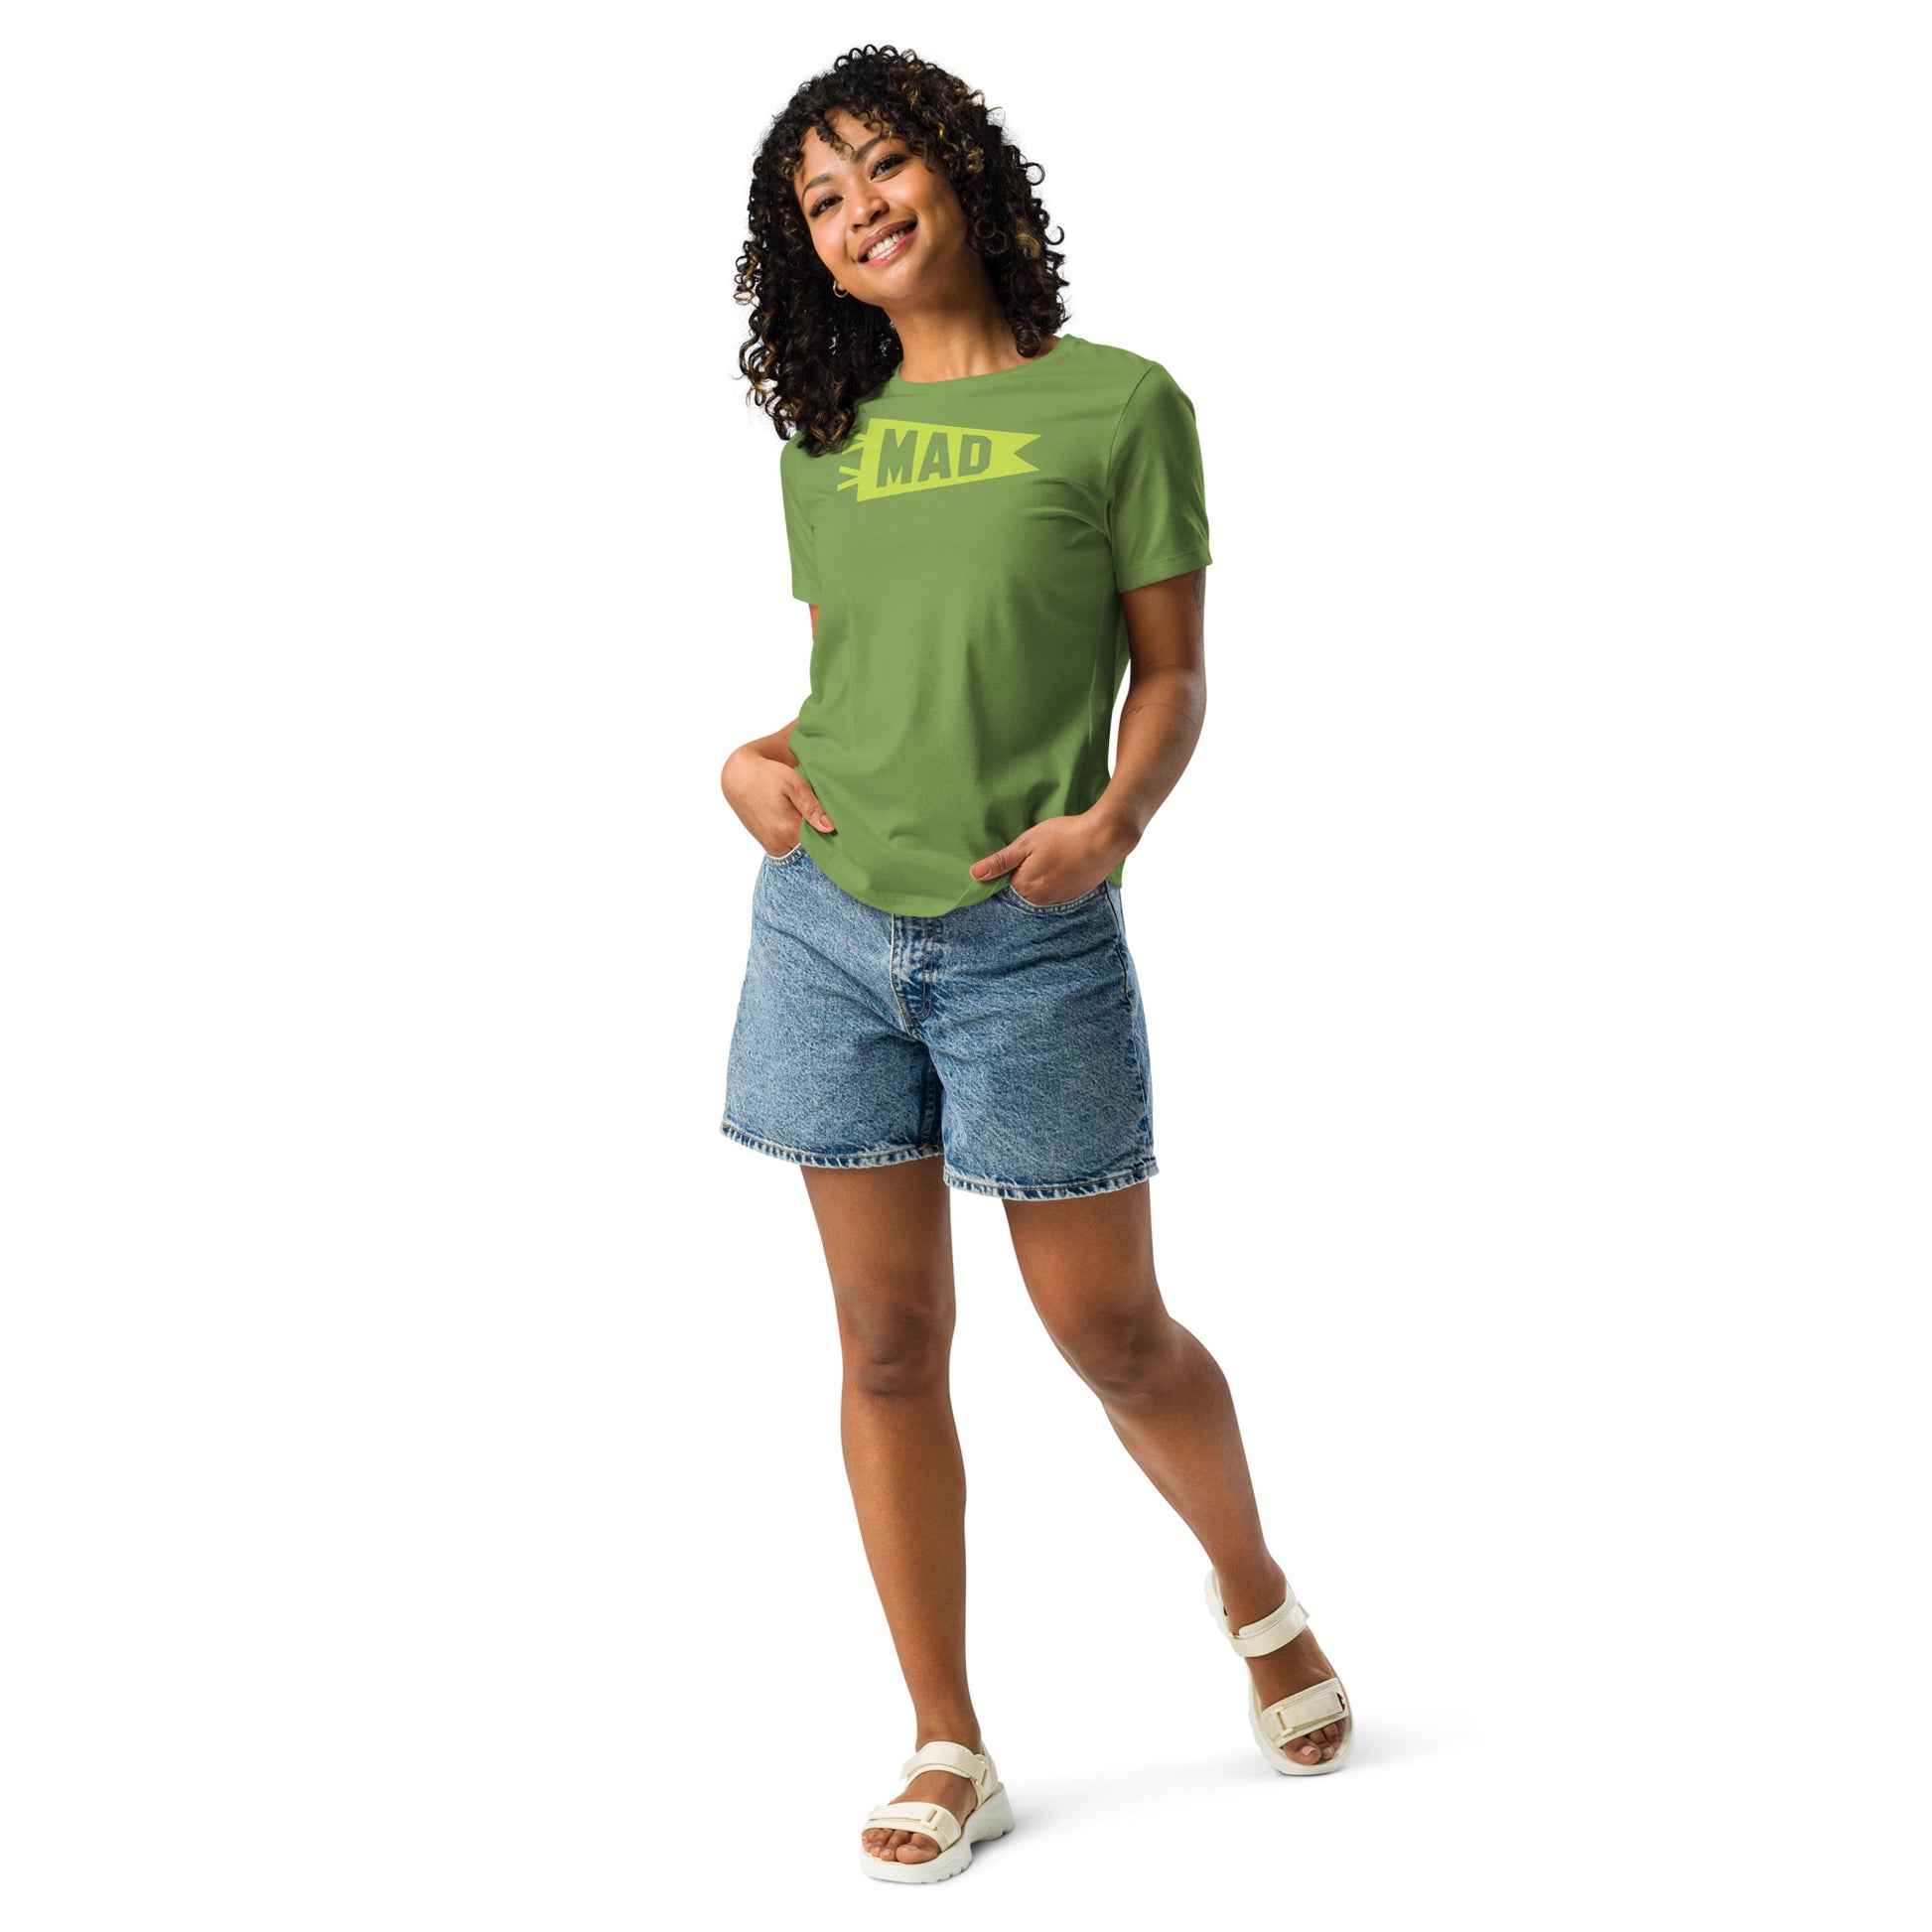 Airport Code Women's Tee - Green Graphic • MAD Madrid • YHM Designs - Image 08